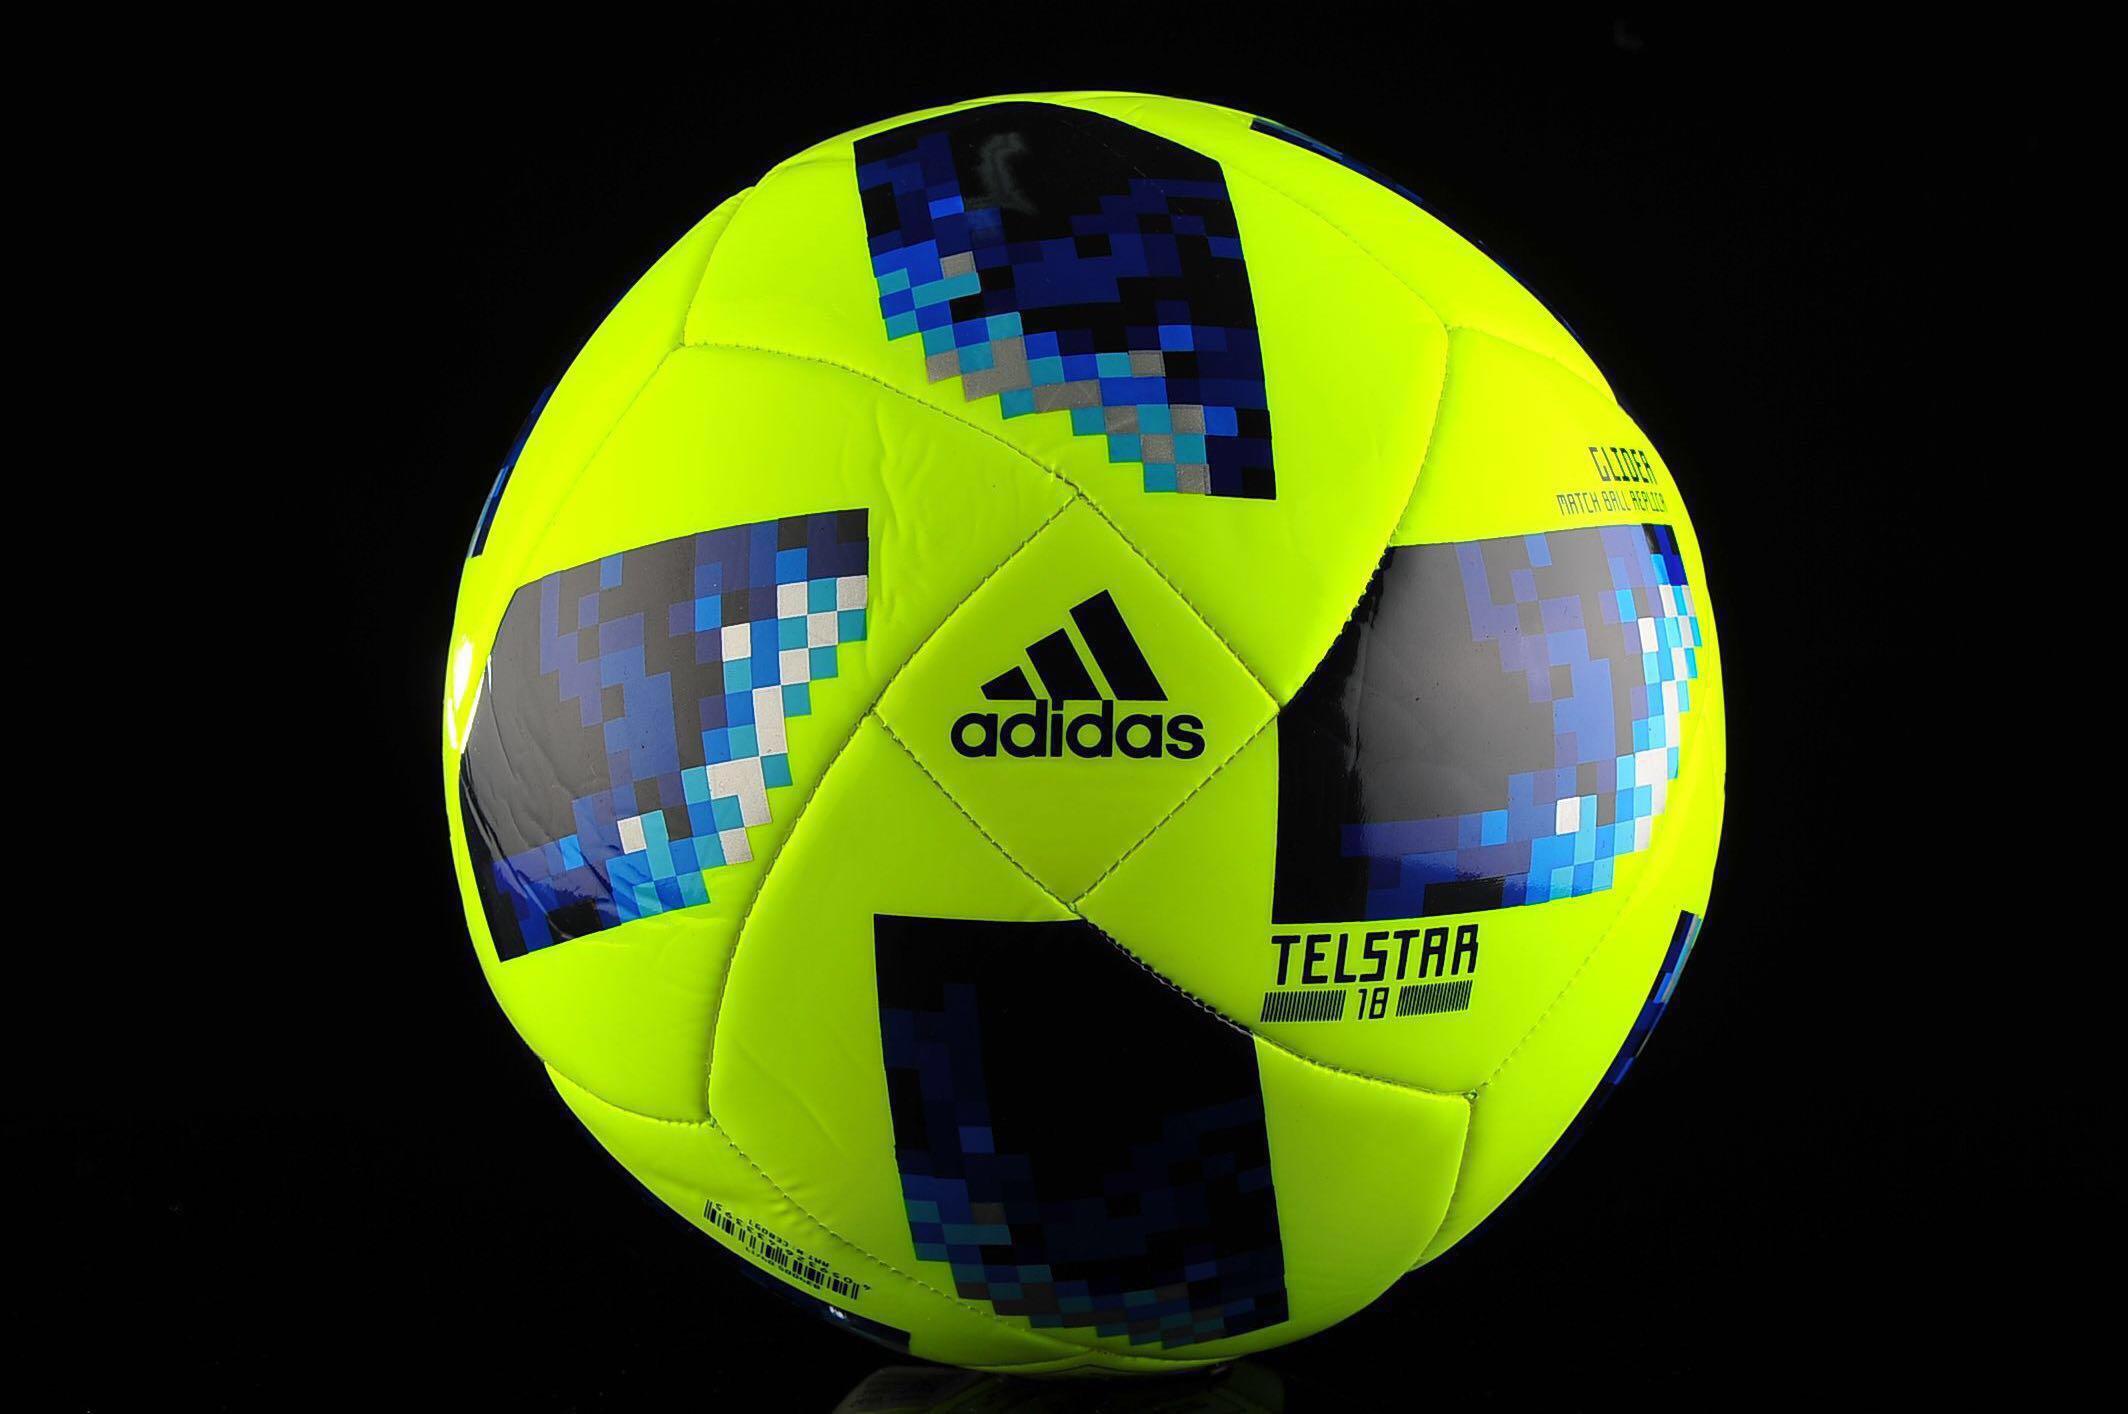 Bn Adidas Telstar 18 Glider Match Ball Size 5 Yellow And Blue Sports Equipment Sports And Games